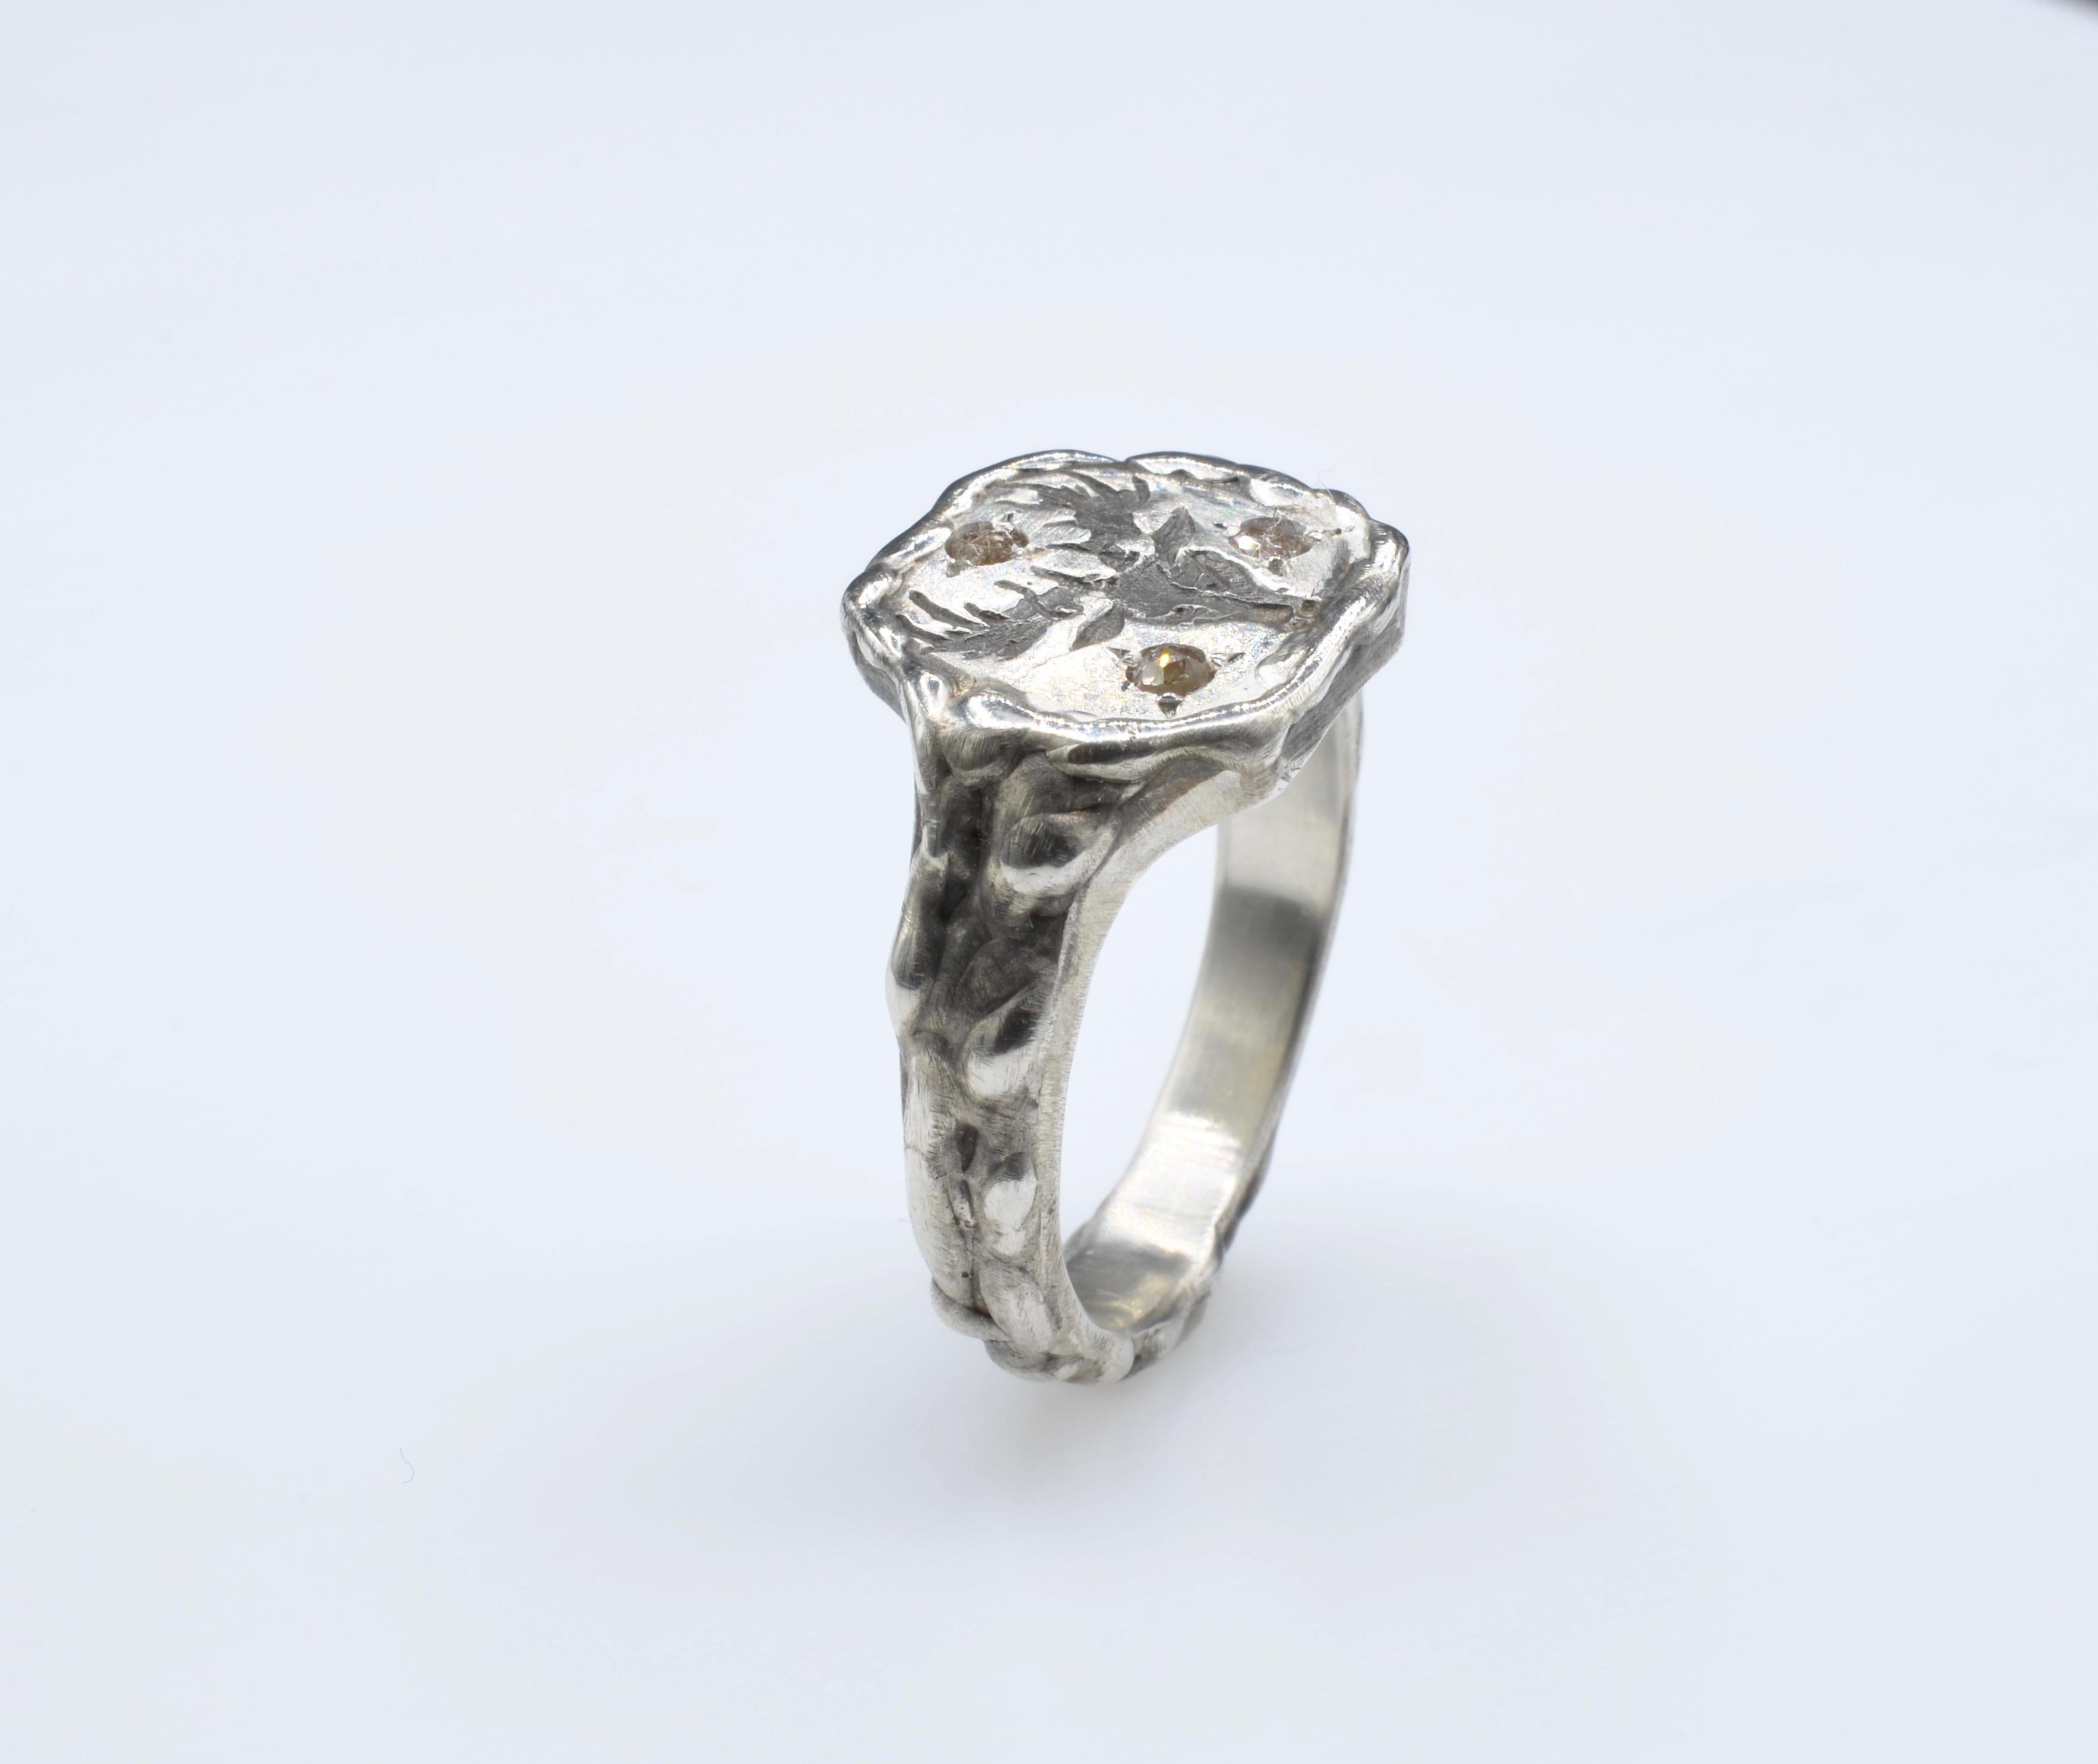 Sterling 925 Silver Ring with a Dear Head as a signet, set with 3 diamonds rose cut light brown color in a grain setting. One of a kind made in North California, USA.
Size 8, can be sized up or down.
